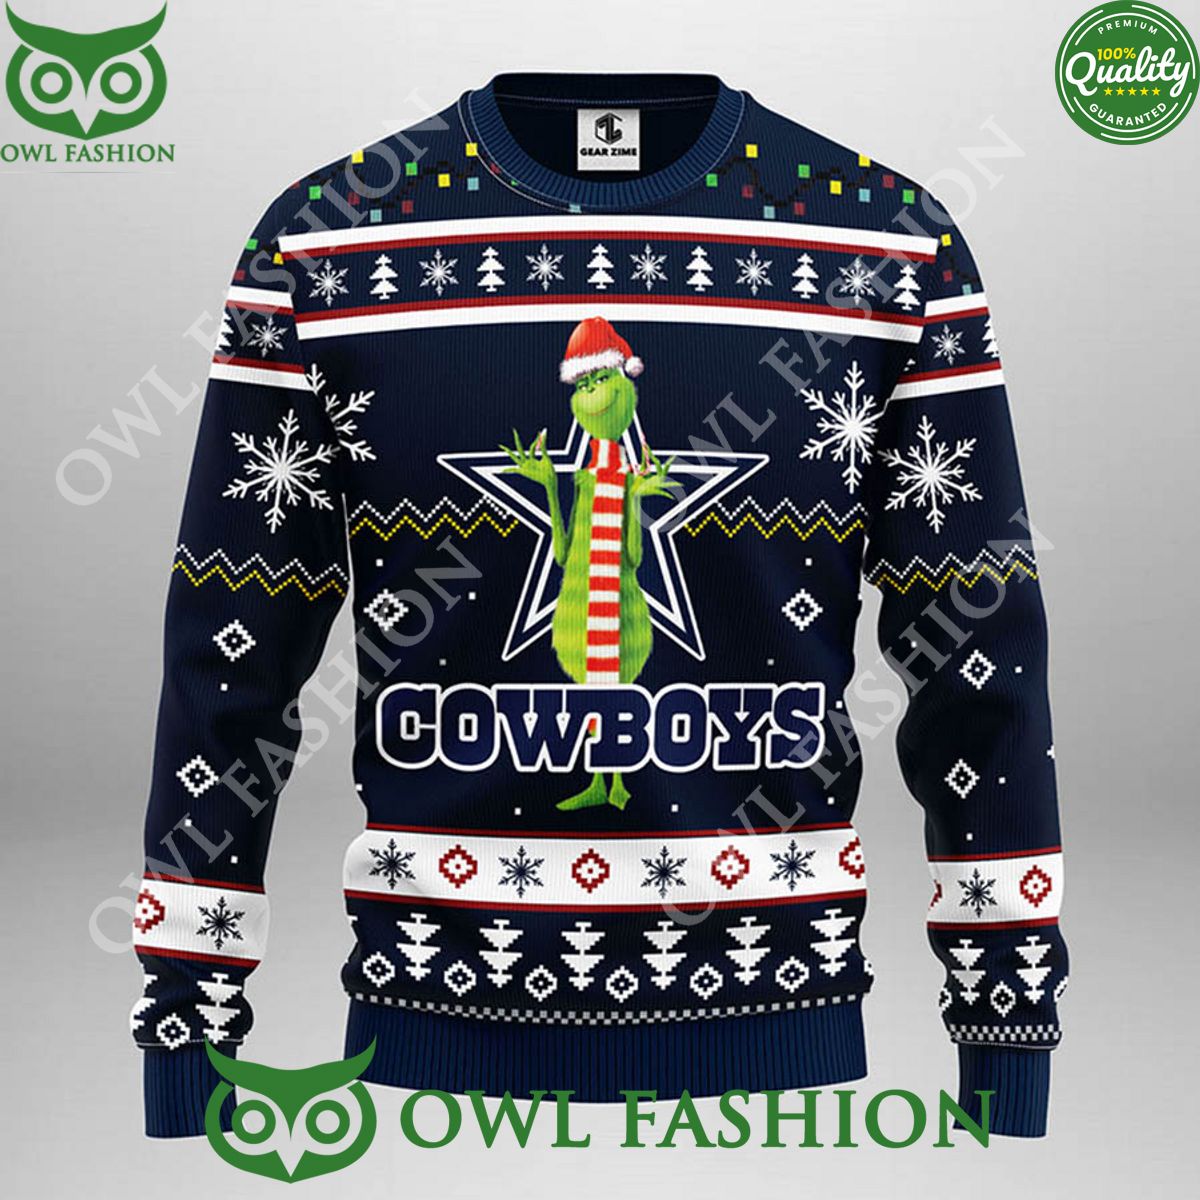 Grinch Stole Christmas Dallas Cowboys Funny NFL Christmas Ugly Sweater Jumper